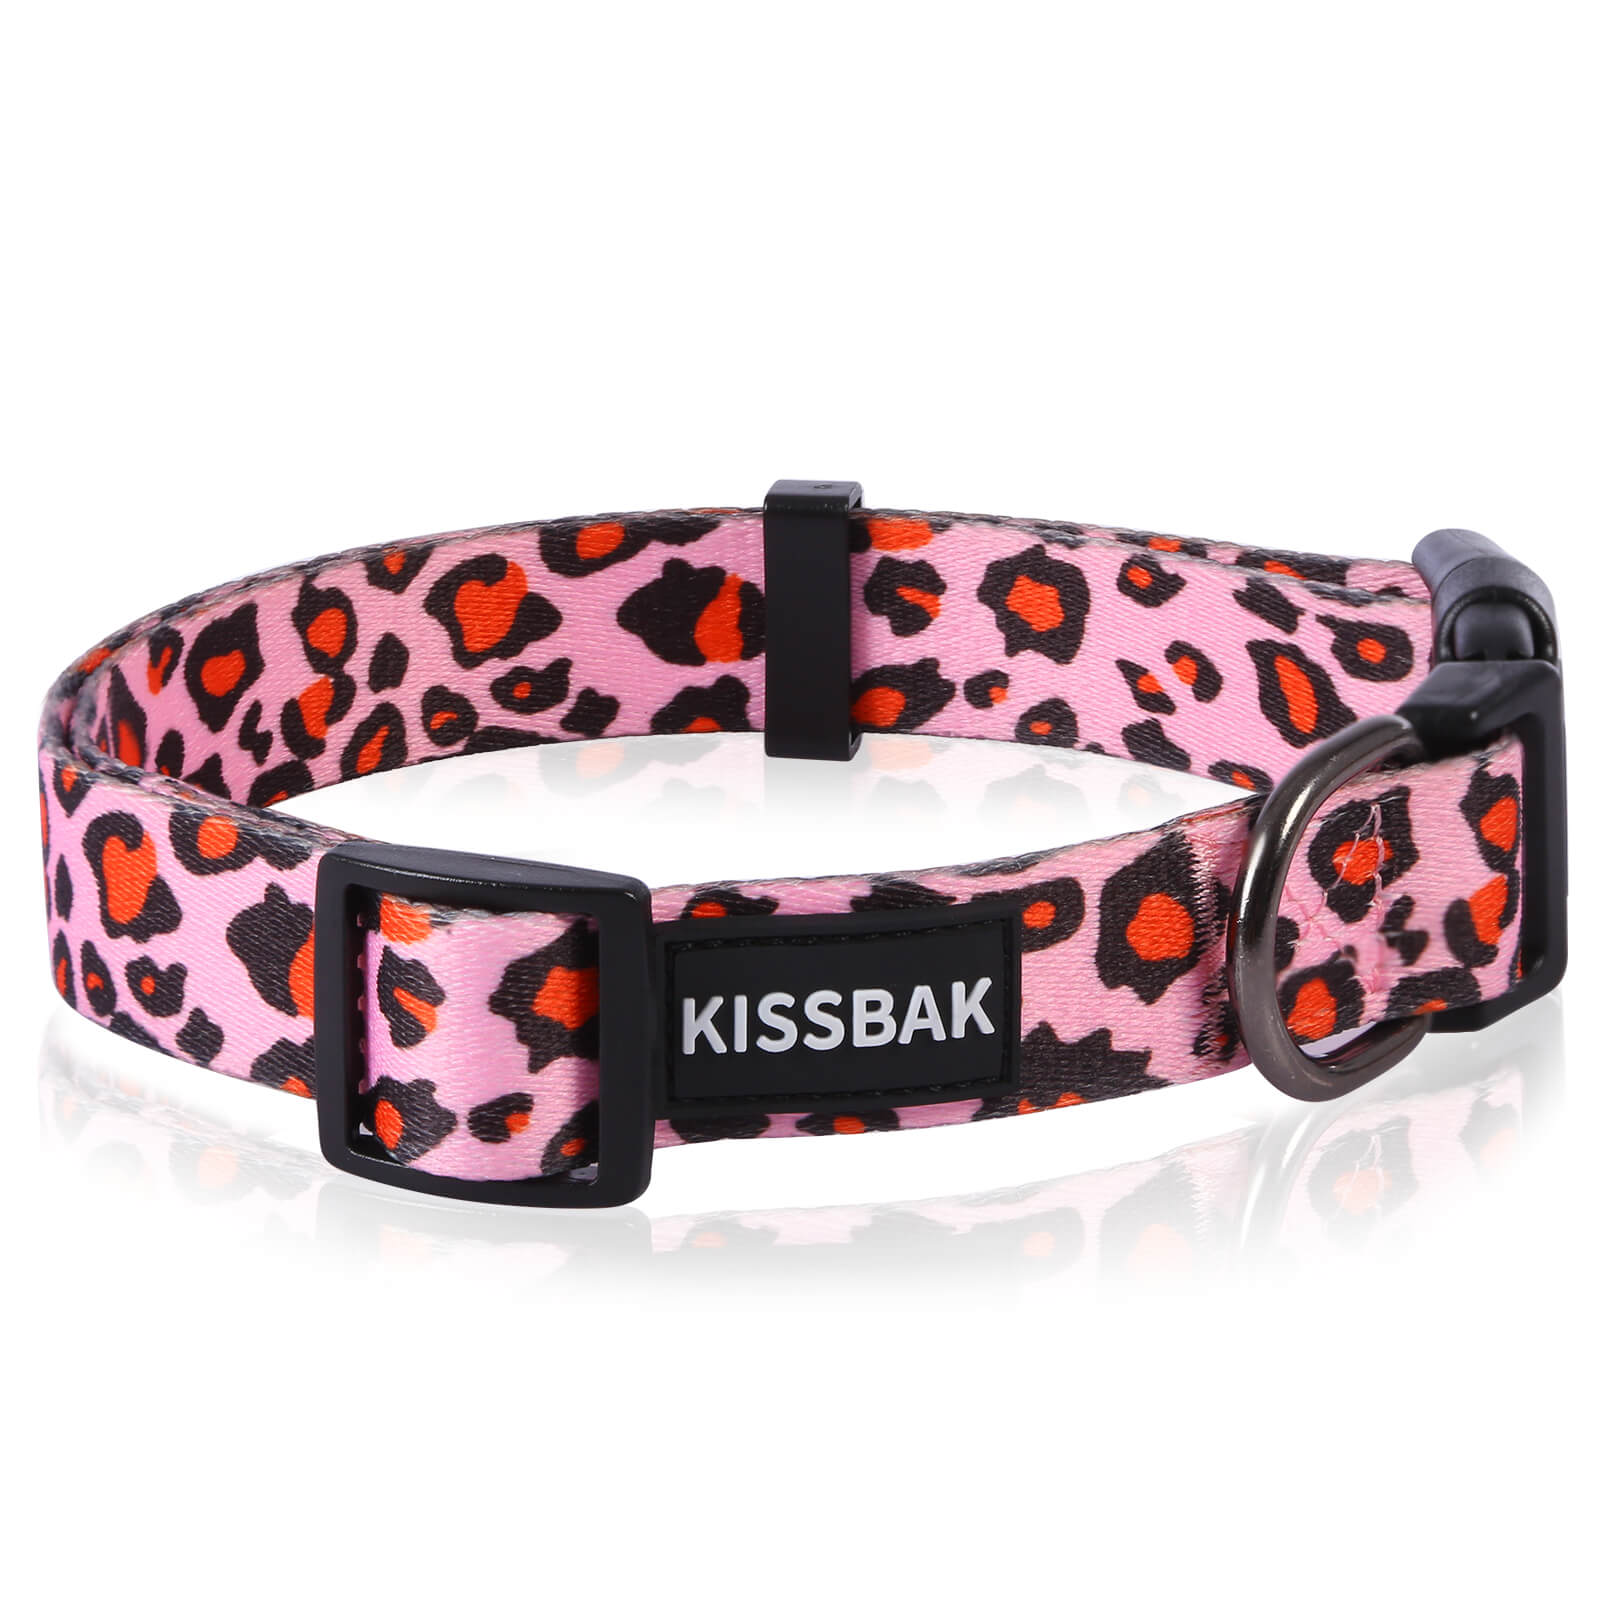 Lucky Love Dog Collars, Cute Girl Collars, Small Medium Large Female  Collars, Part of Purchase Donated to Rescue (Ladybird, XS)